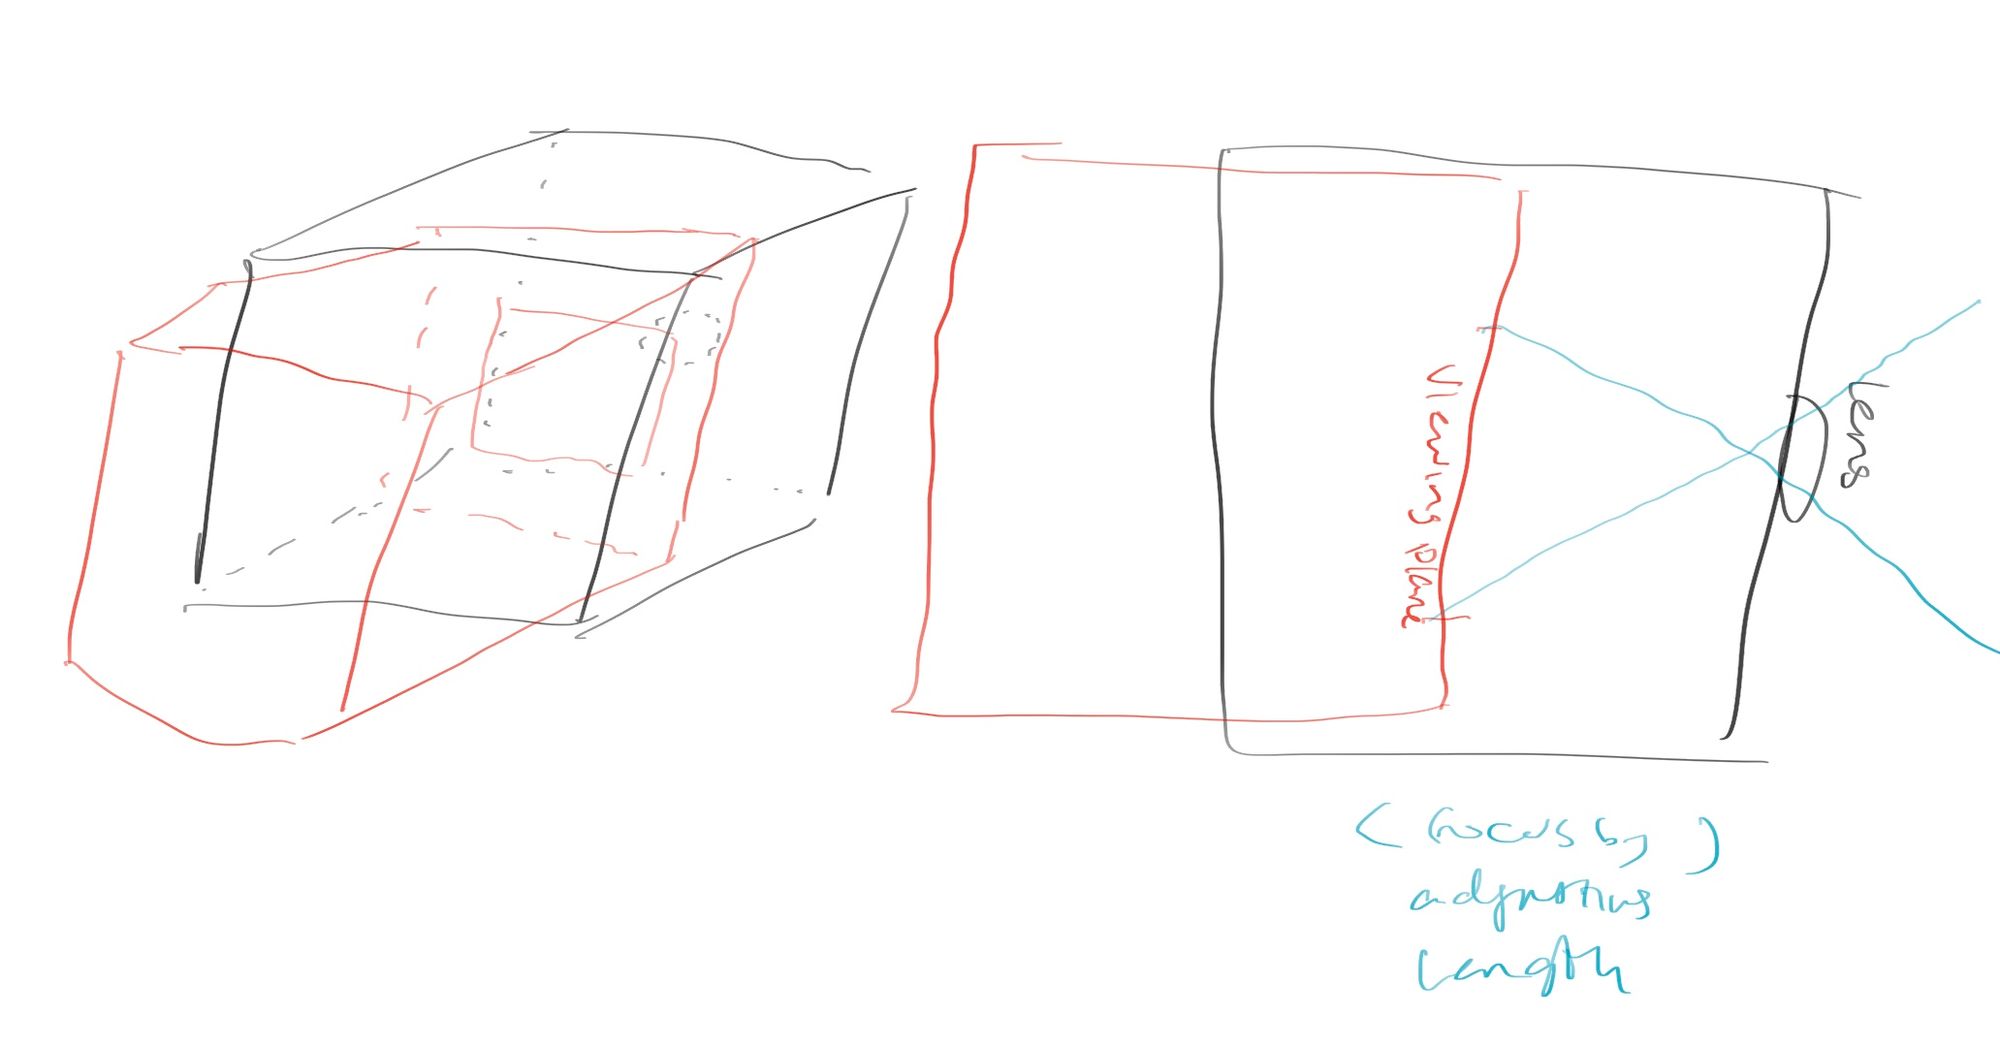 A bad sketch of the test camera obscura box to the right.